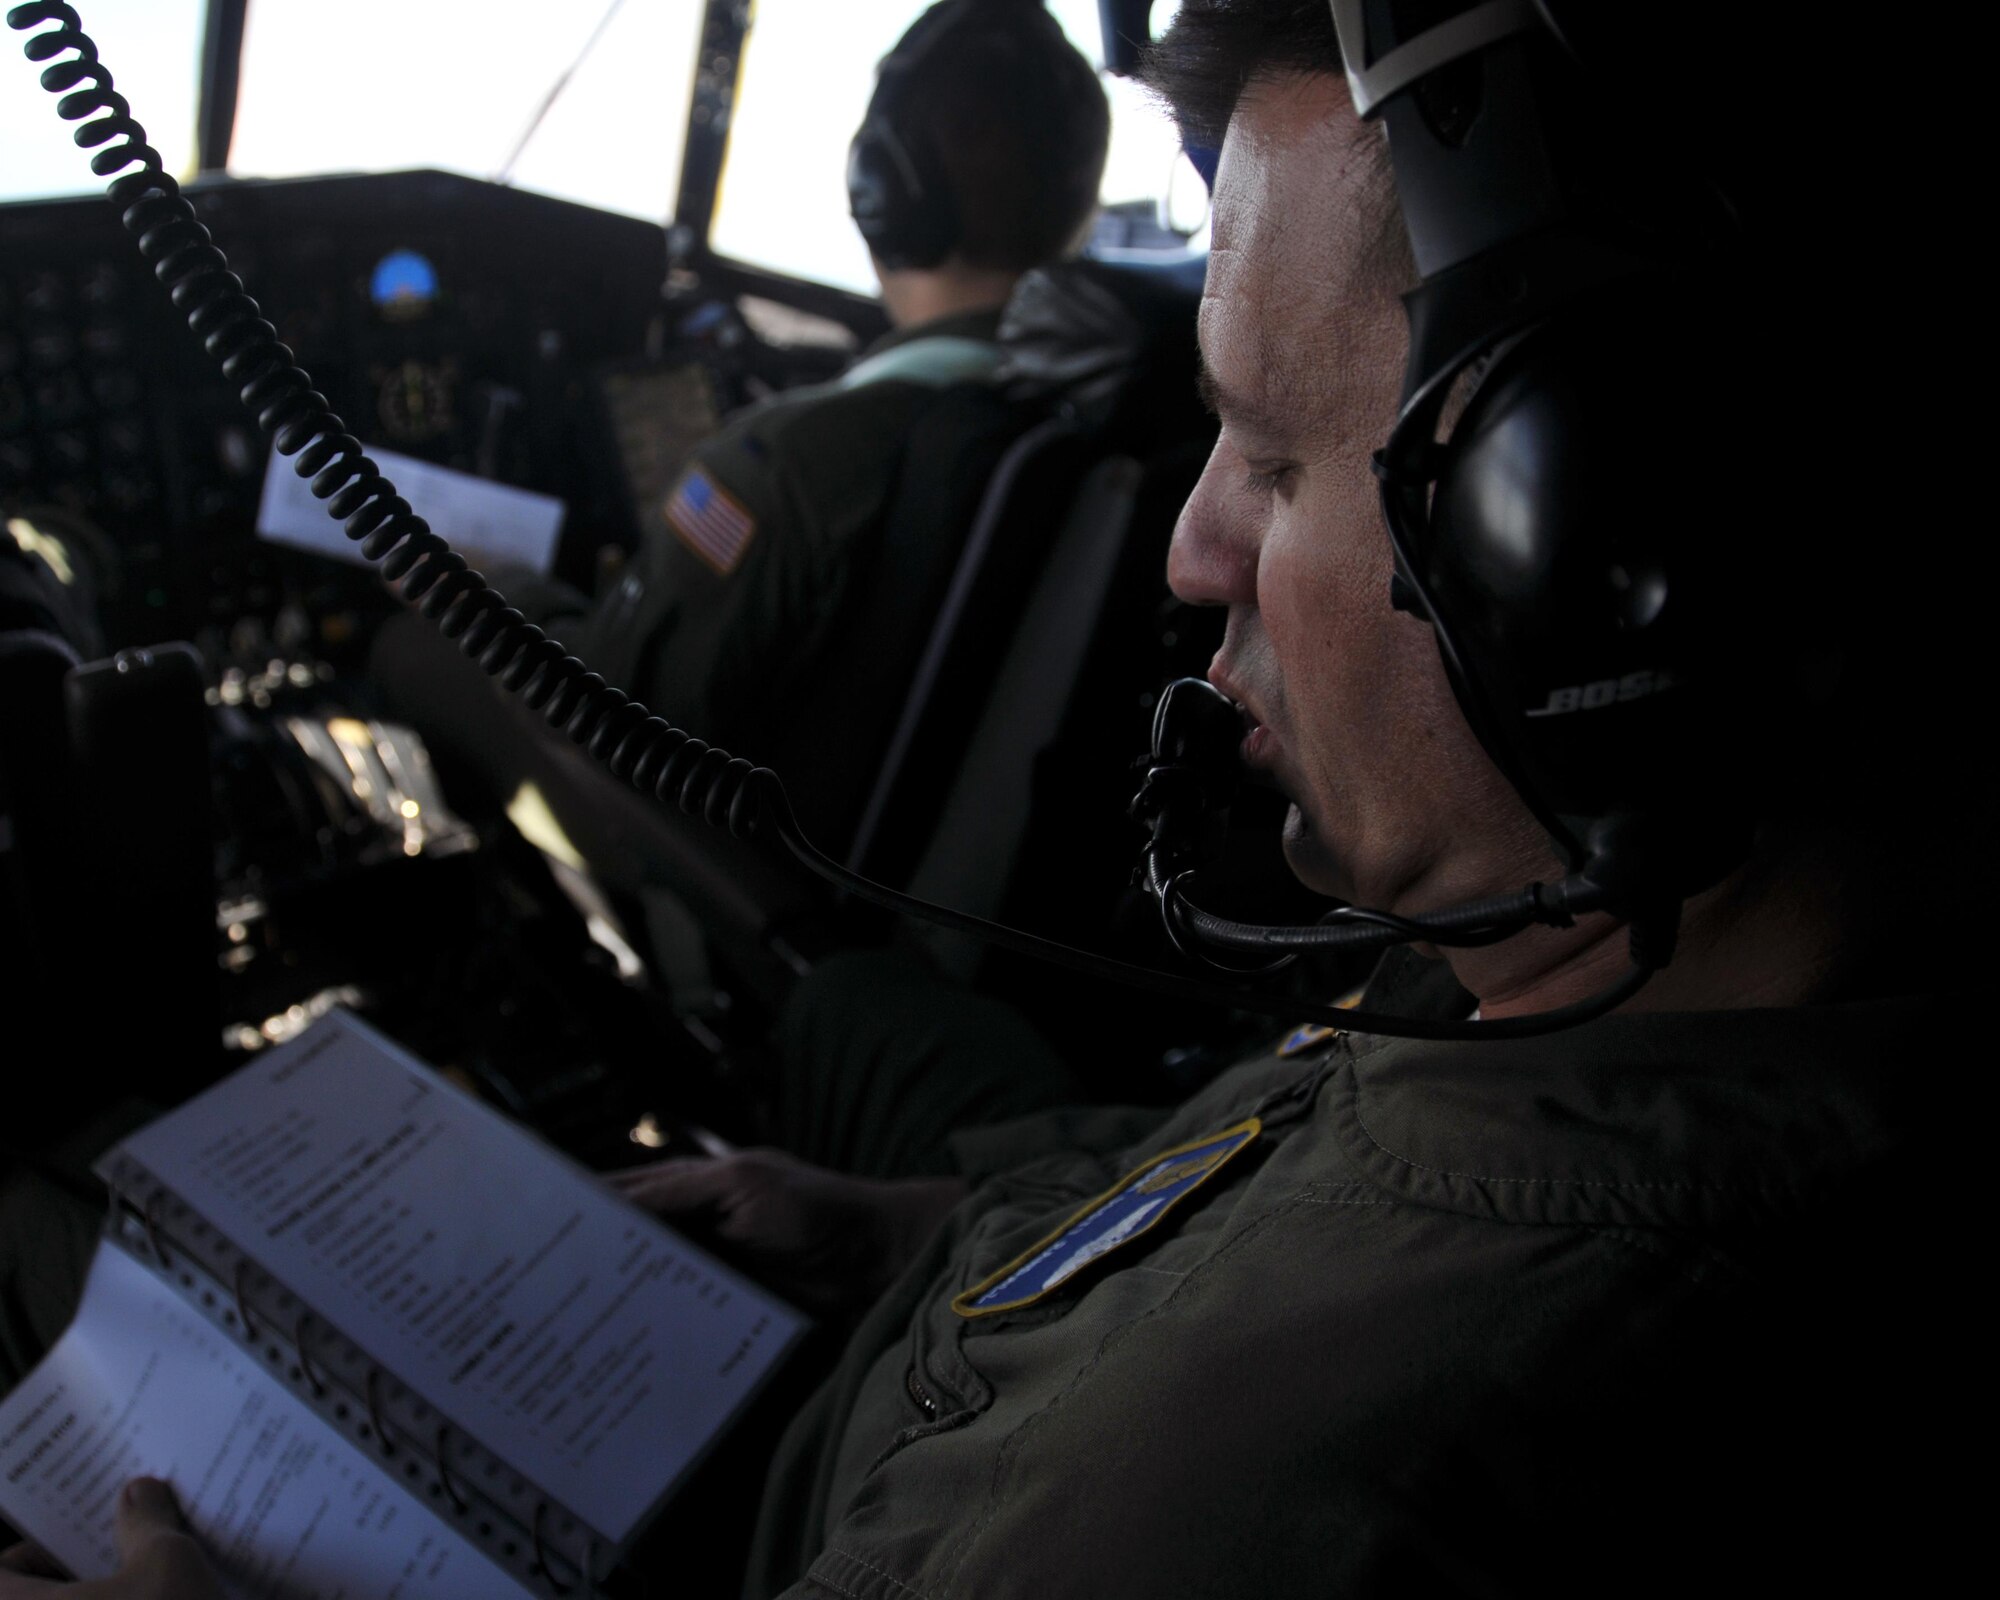 Master Sgt. Scott Randall, 700th Airlift Squadron flight engineer, reviews a checklist during the C-130’s flight from Aviano Air Base, Italy to Hohenfels Training Area, Germany on April 11, 2016. The 94th Airlift Wing participated in Exercise Saber Junction 16 April 11-15. (U.S. Air Force photo/ Senior Airman Andrew J. Park)
